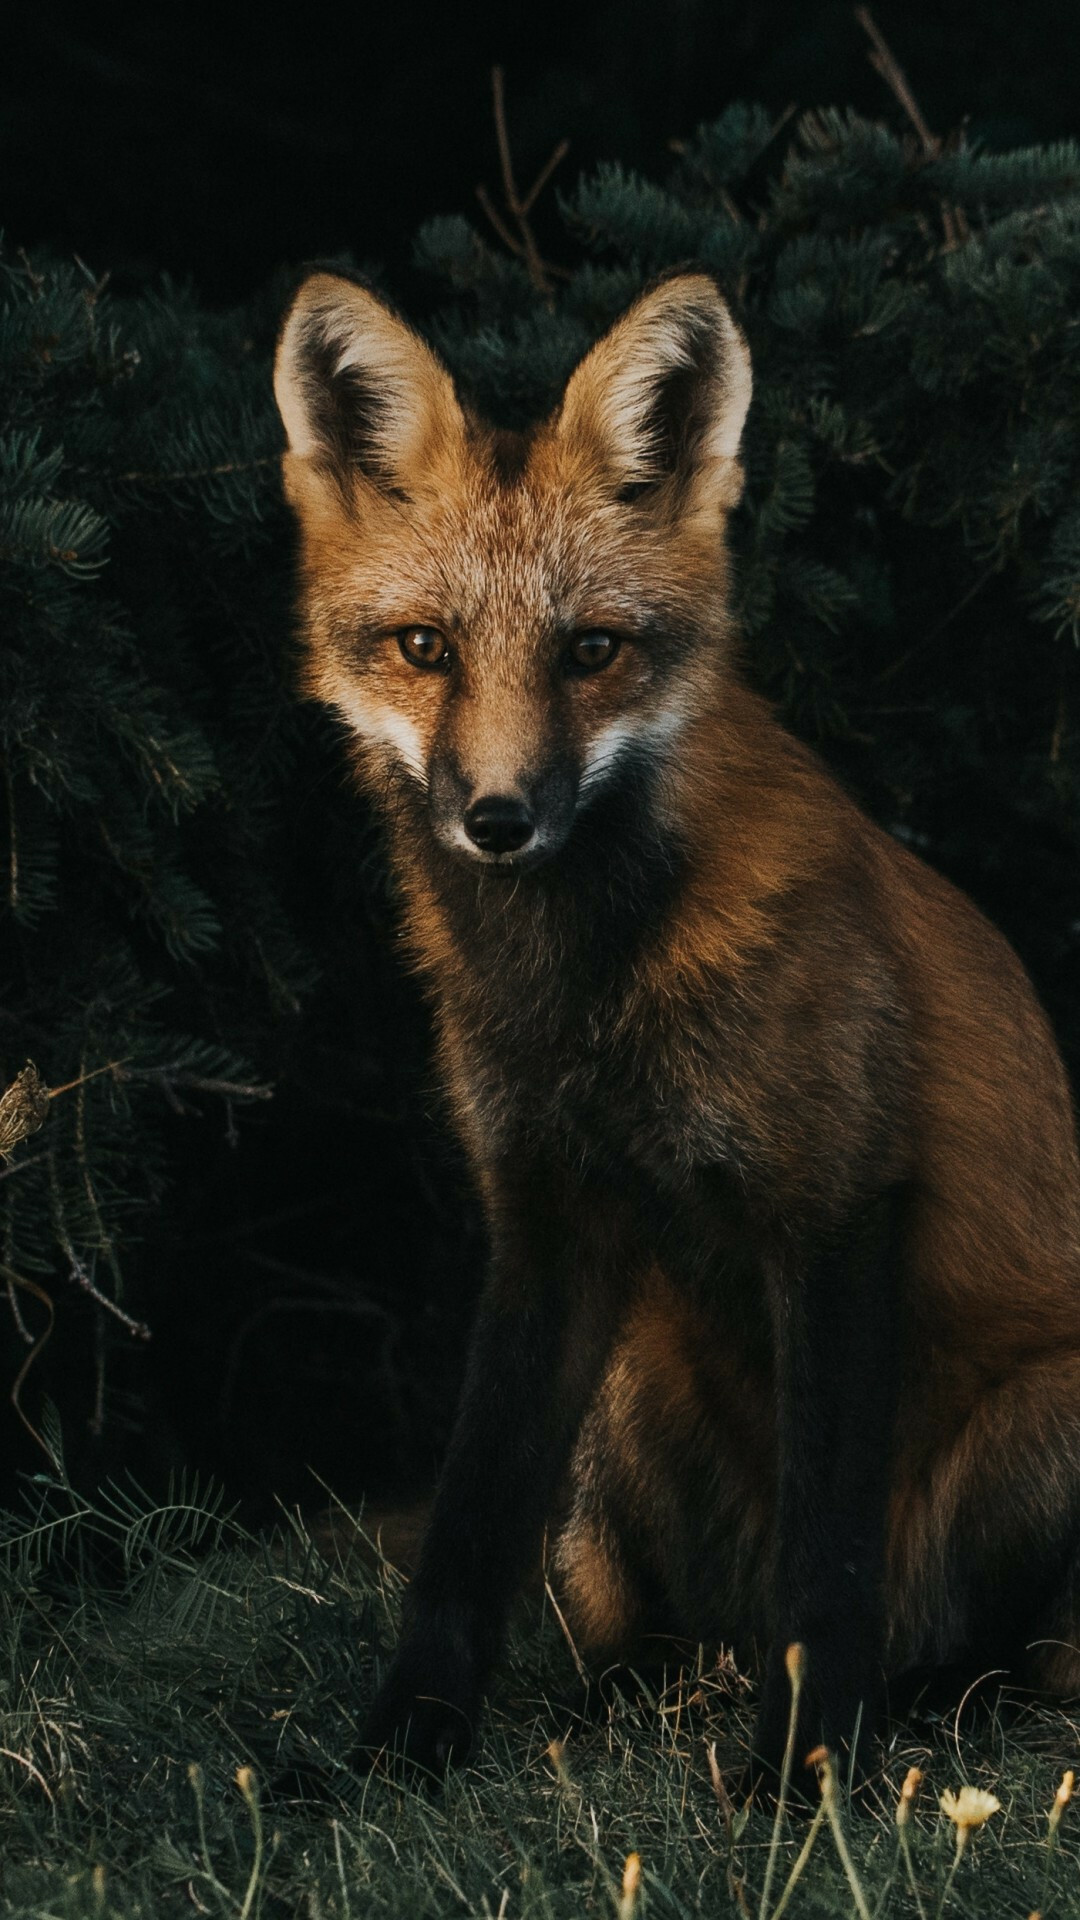 Fox: A small, doglike mammal with an elongated muzzle, moderately long legs, and a long, bushy tail with a white tip. 1080x1920 Full HD Wallpaper.